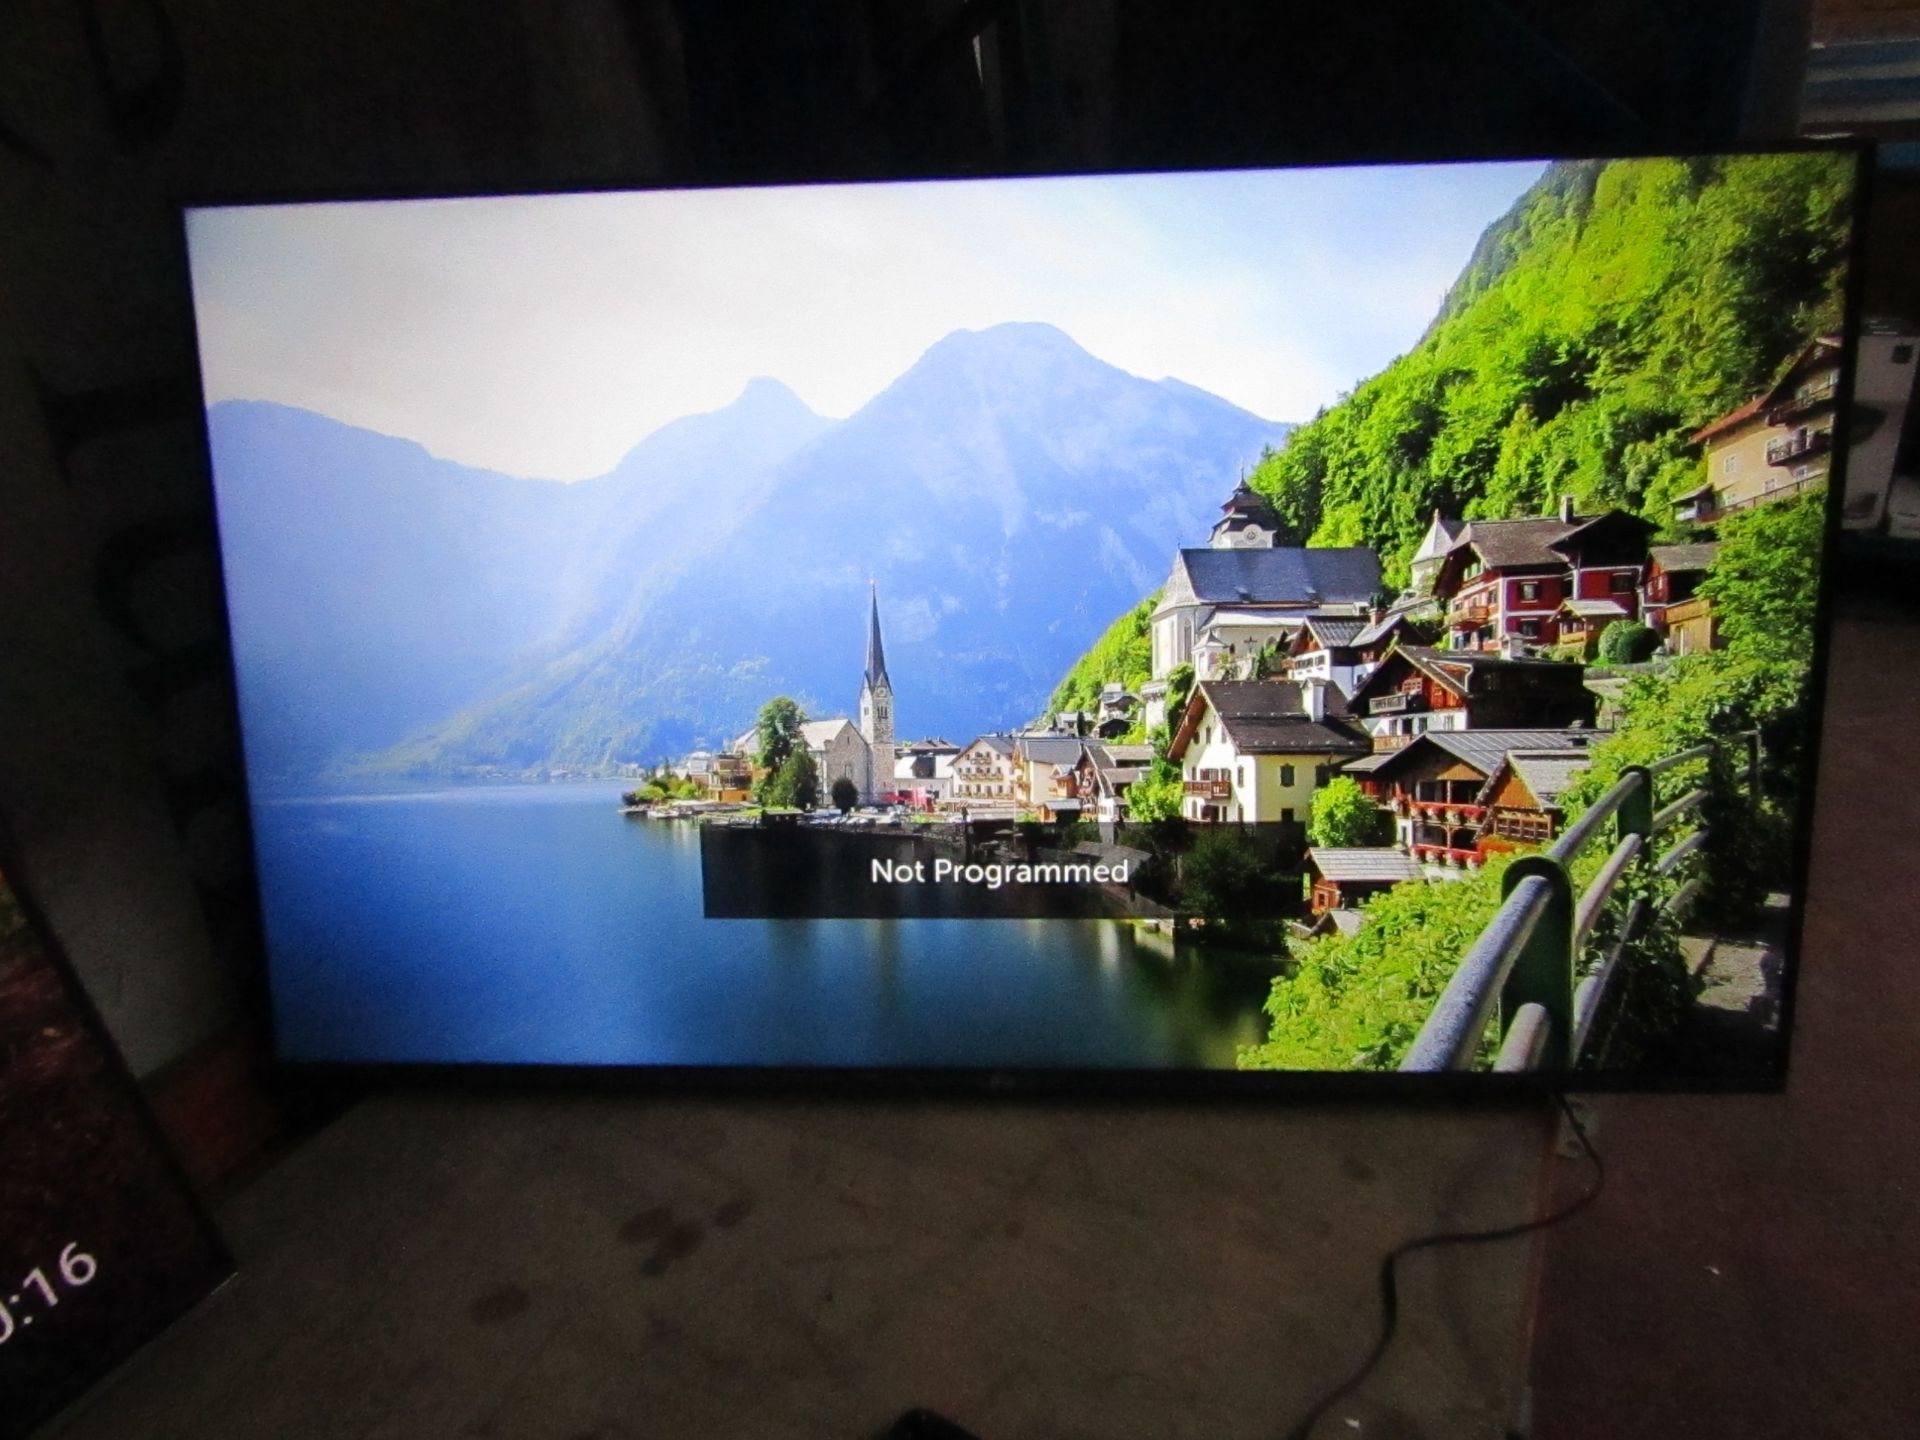 LG55UM7660 Smart 4K LED TV, tested working with Magic remote control, Missing stand and box, has a